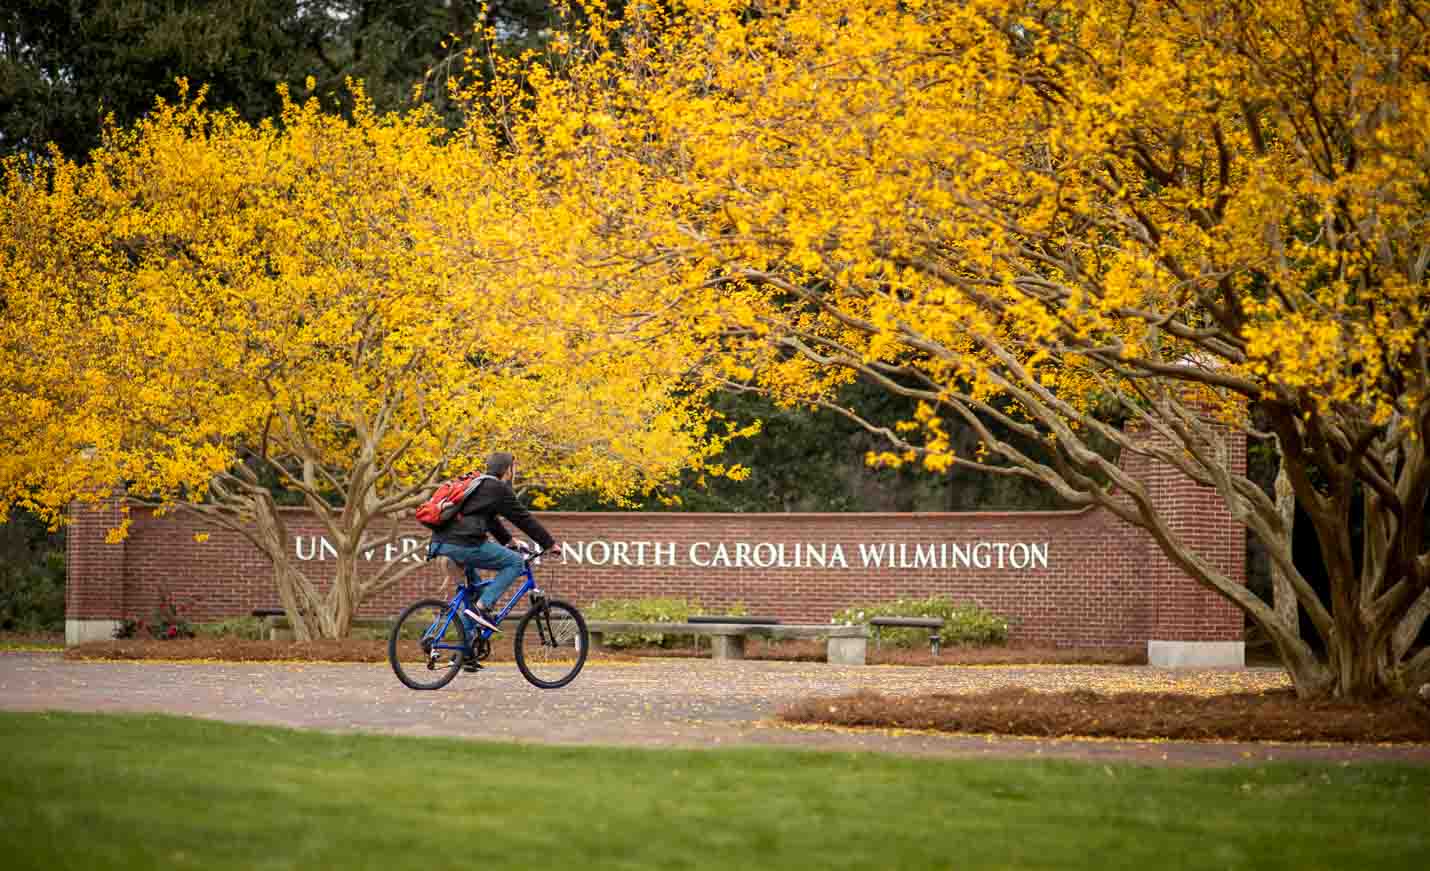 Students riding bikes in front of UNCW sign